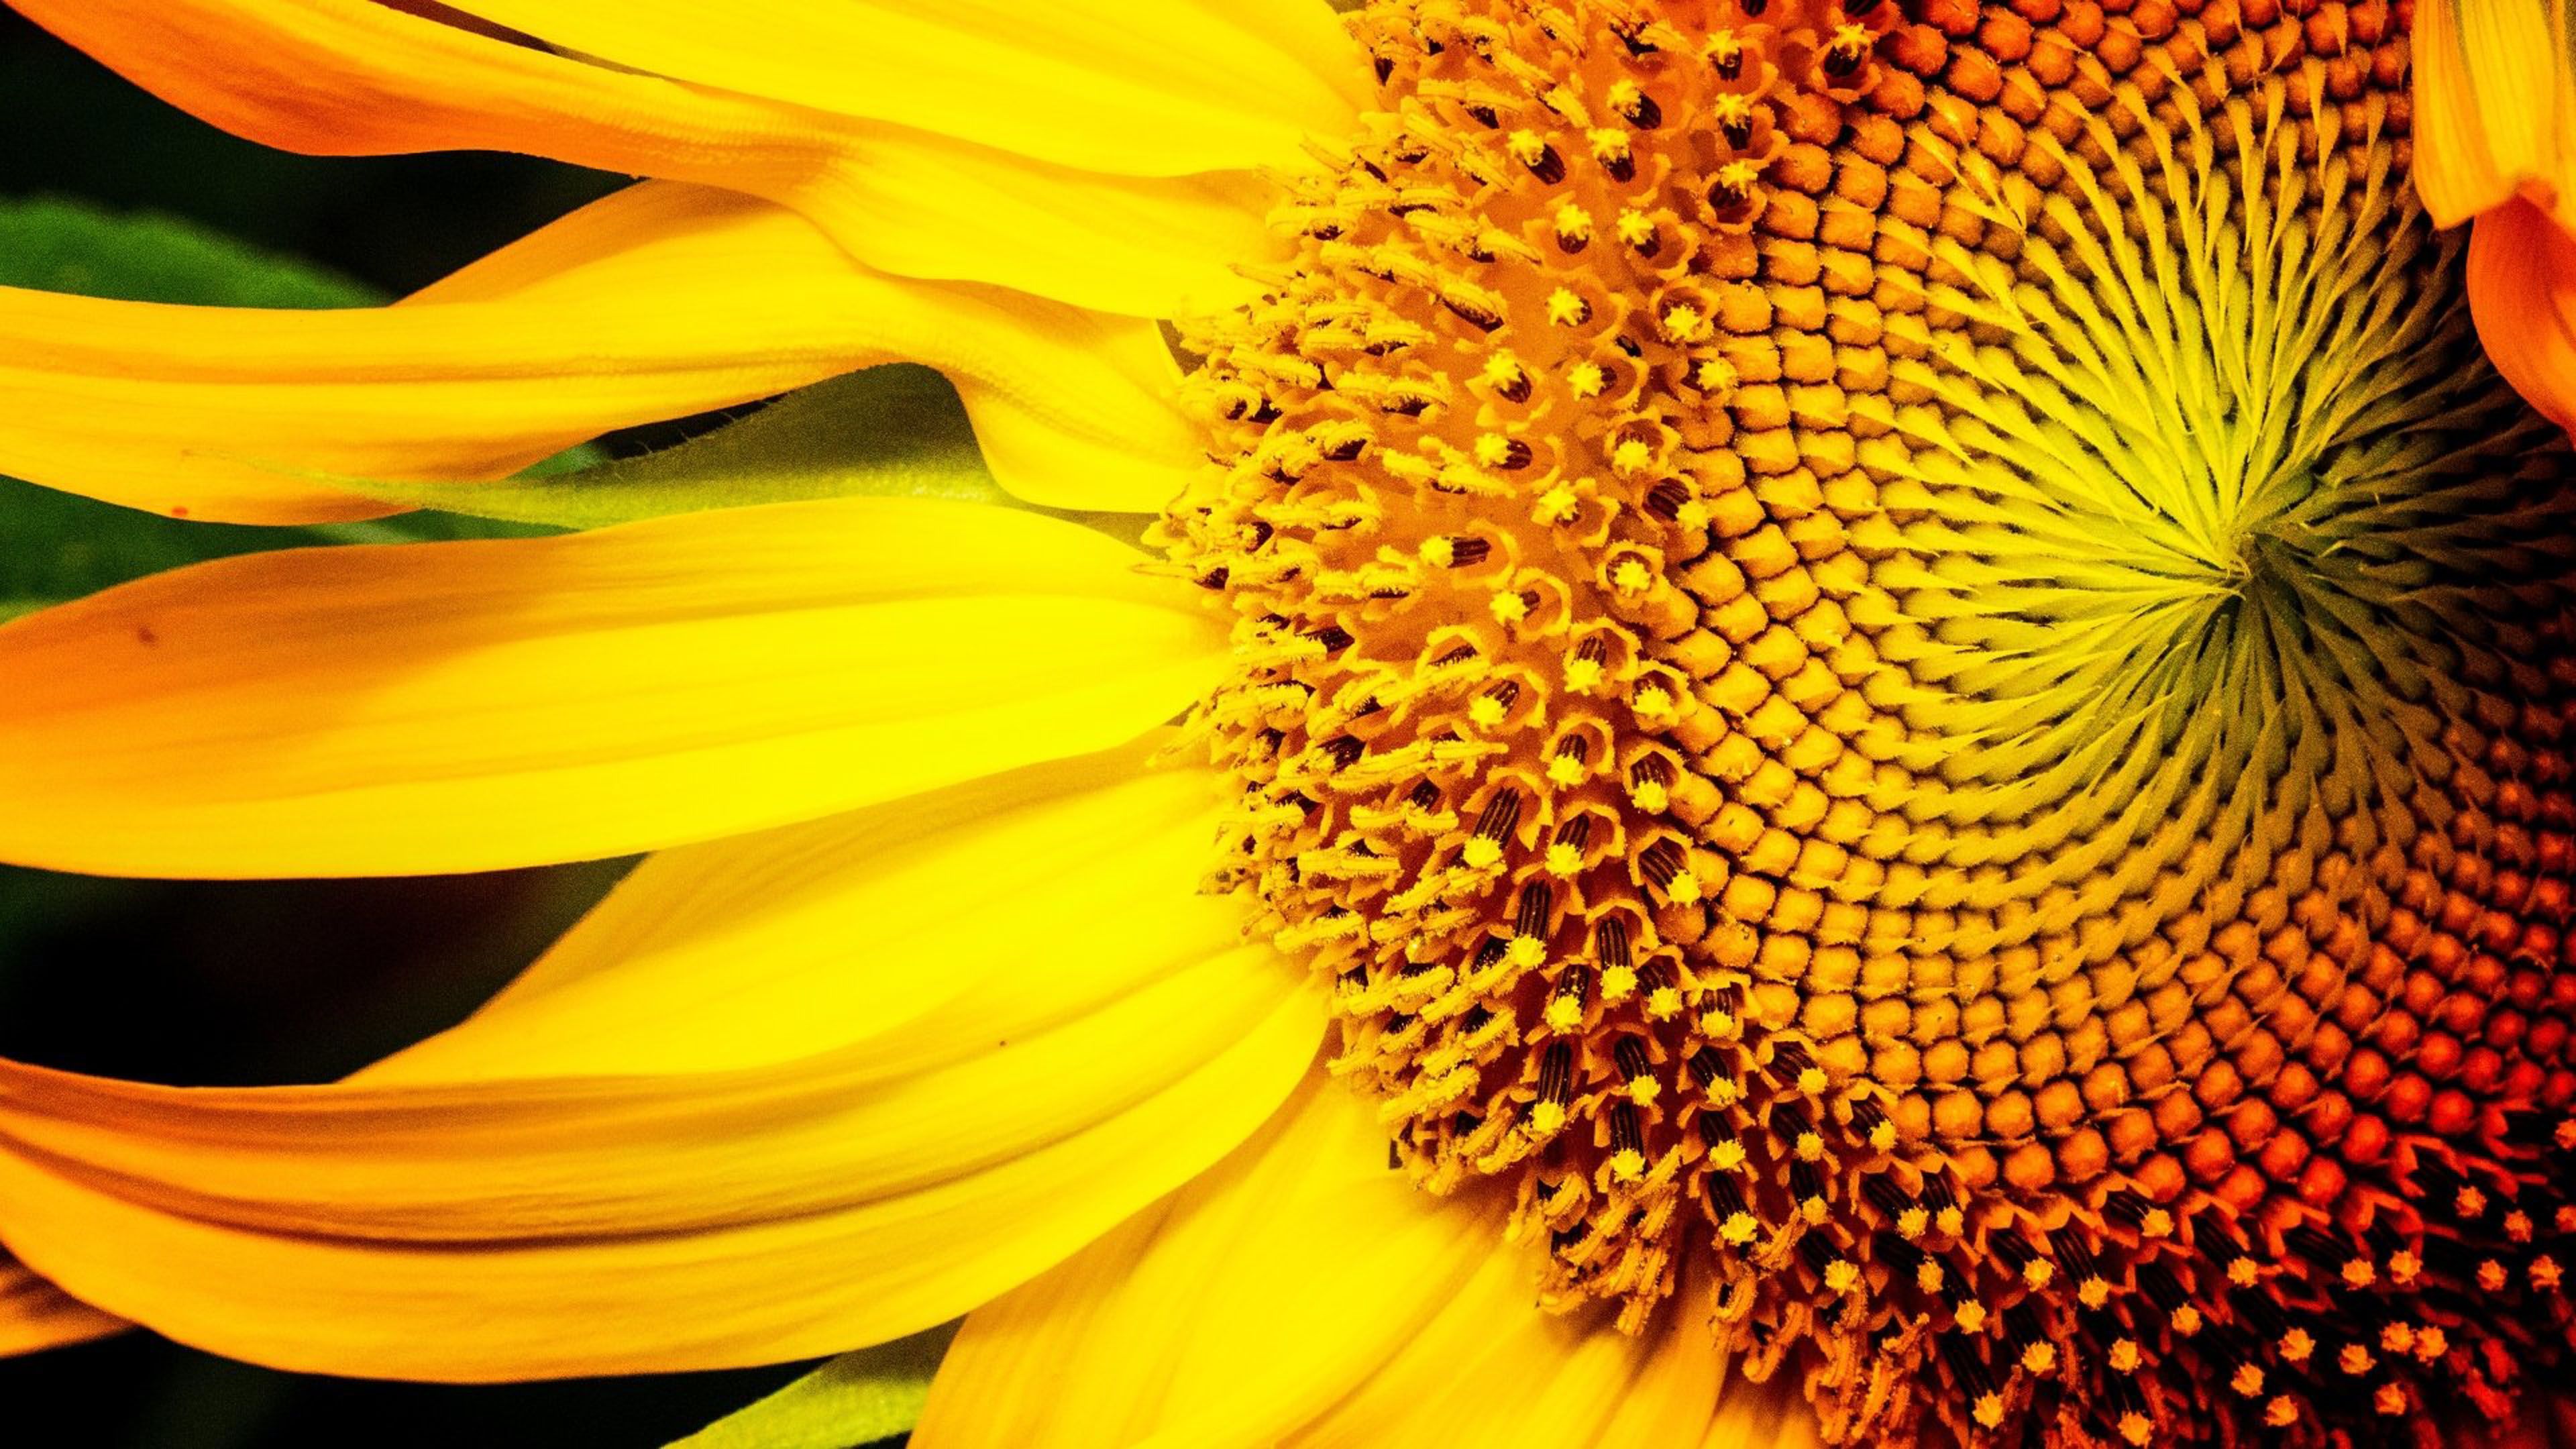 Sunflower Yellow Color Macro Photography 4k Ultra HD Wallpaper For Your Desktop And Android Mobile Phones 3840x2160, Wallpaper13.com